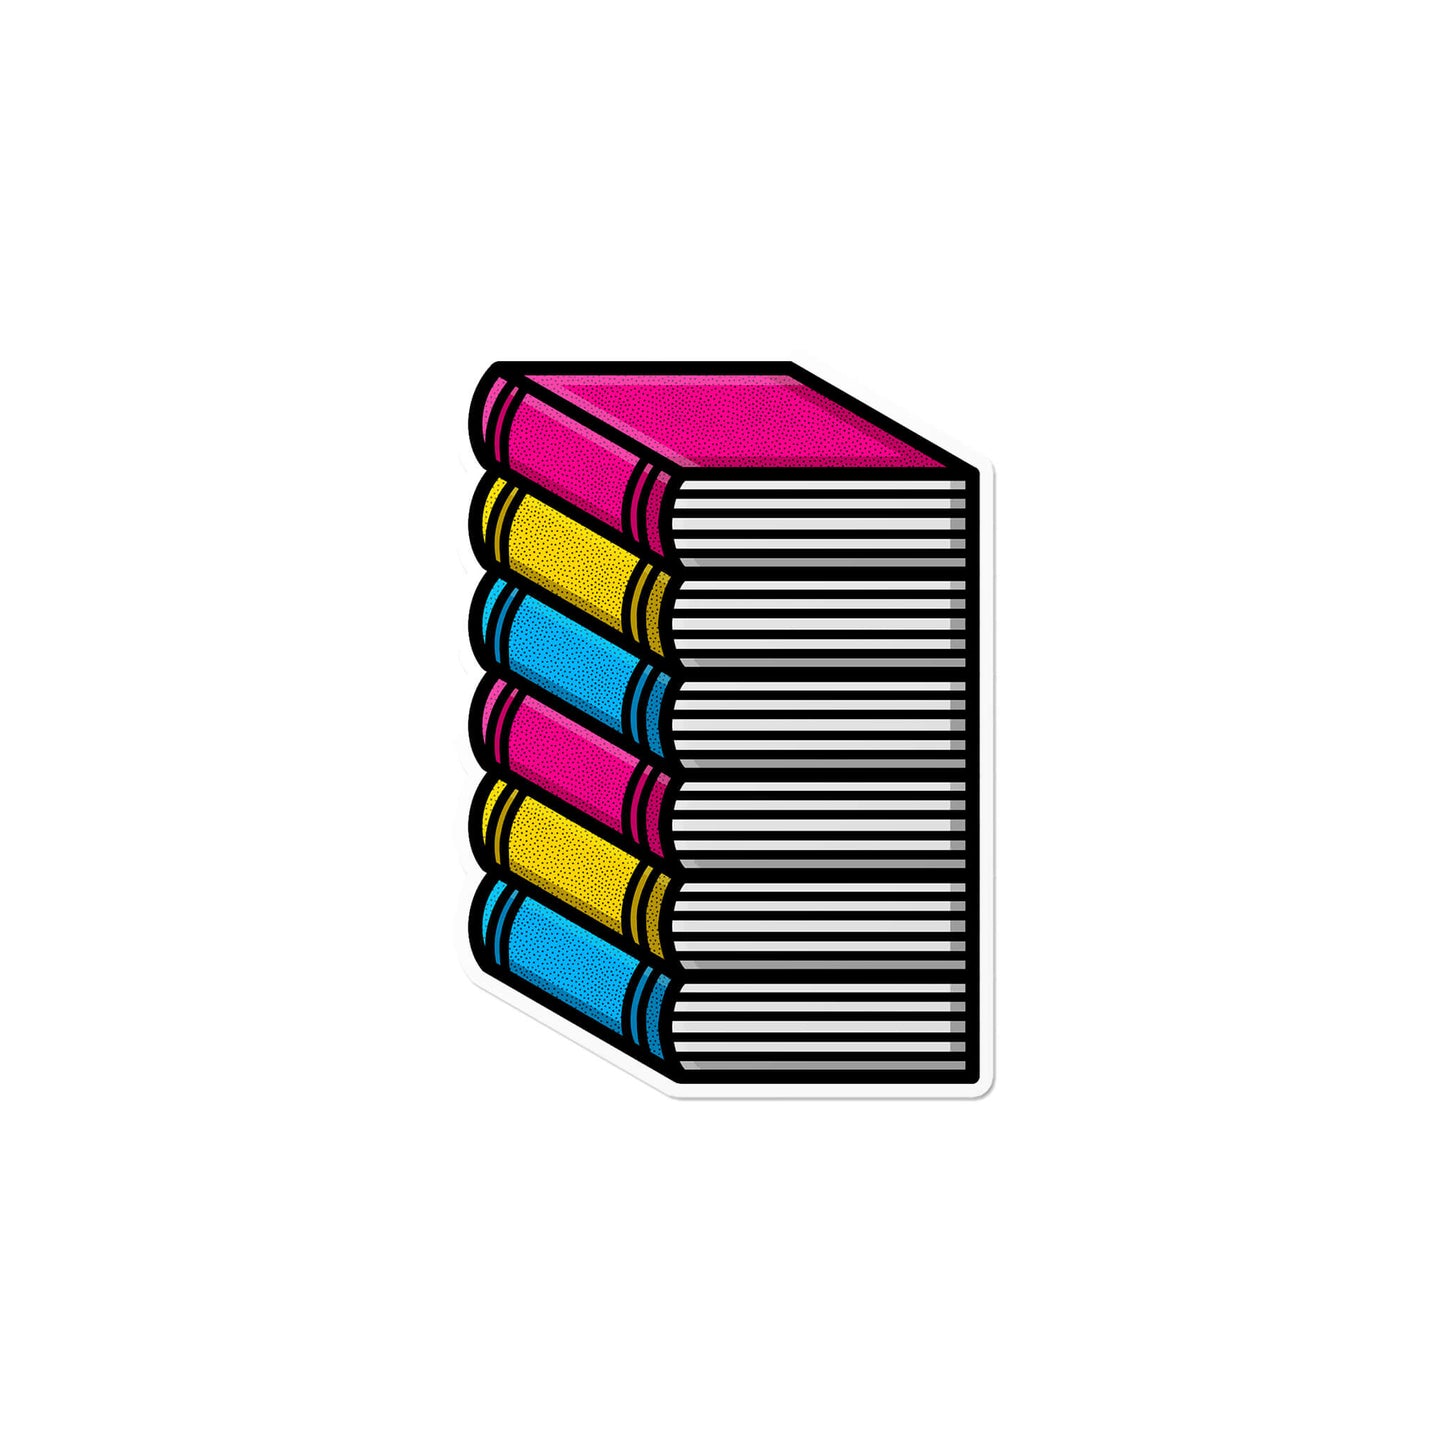 Pansexual Pile of Books Sticker